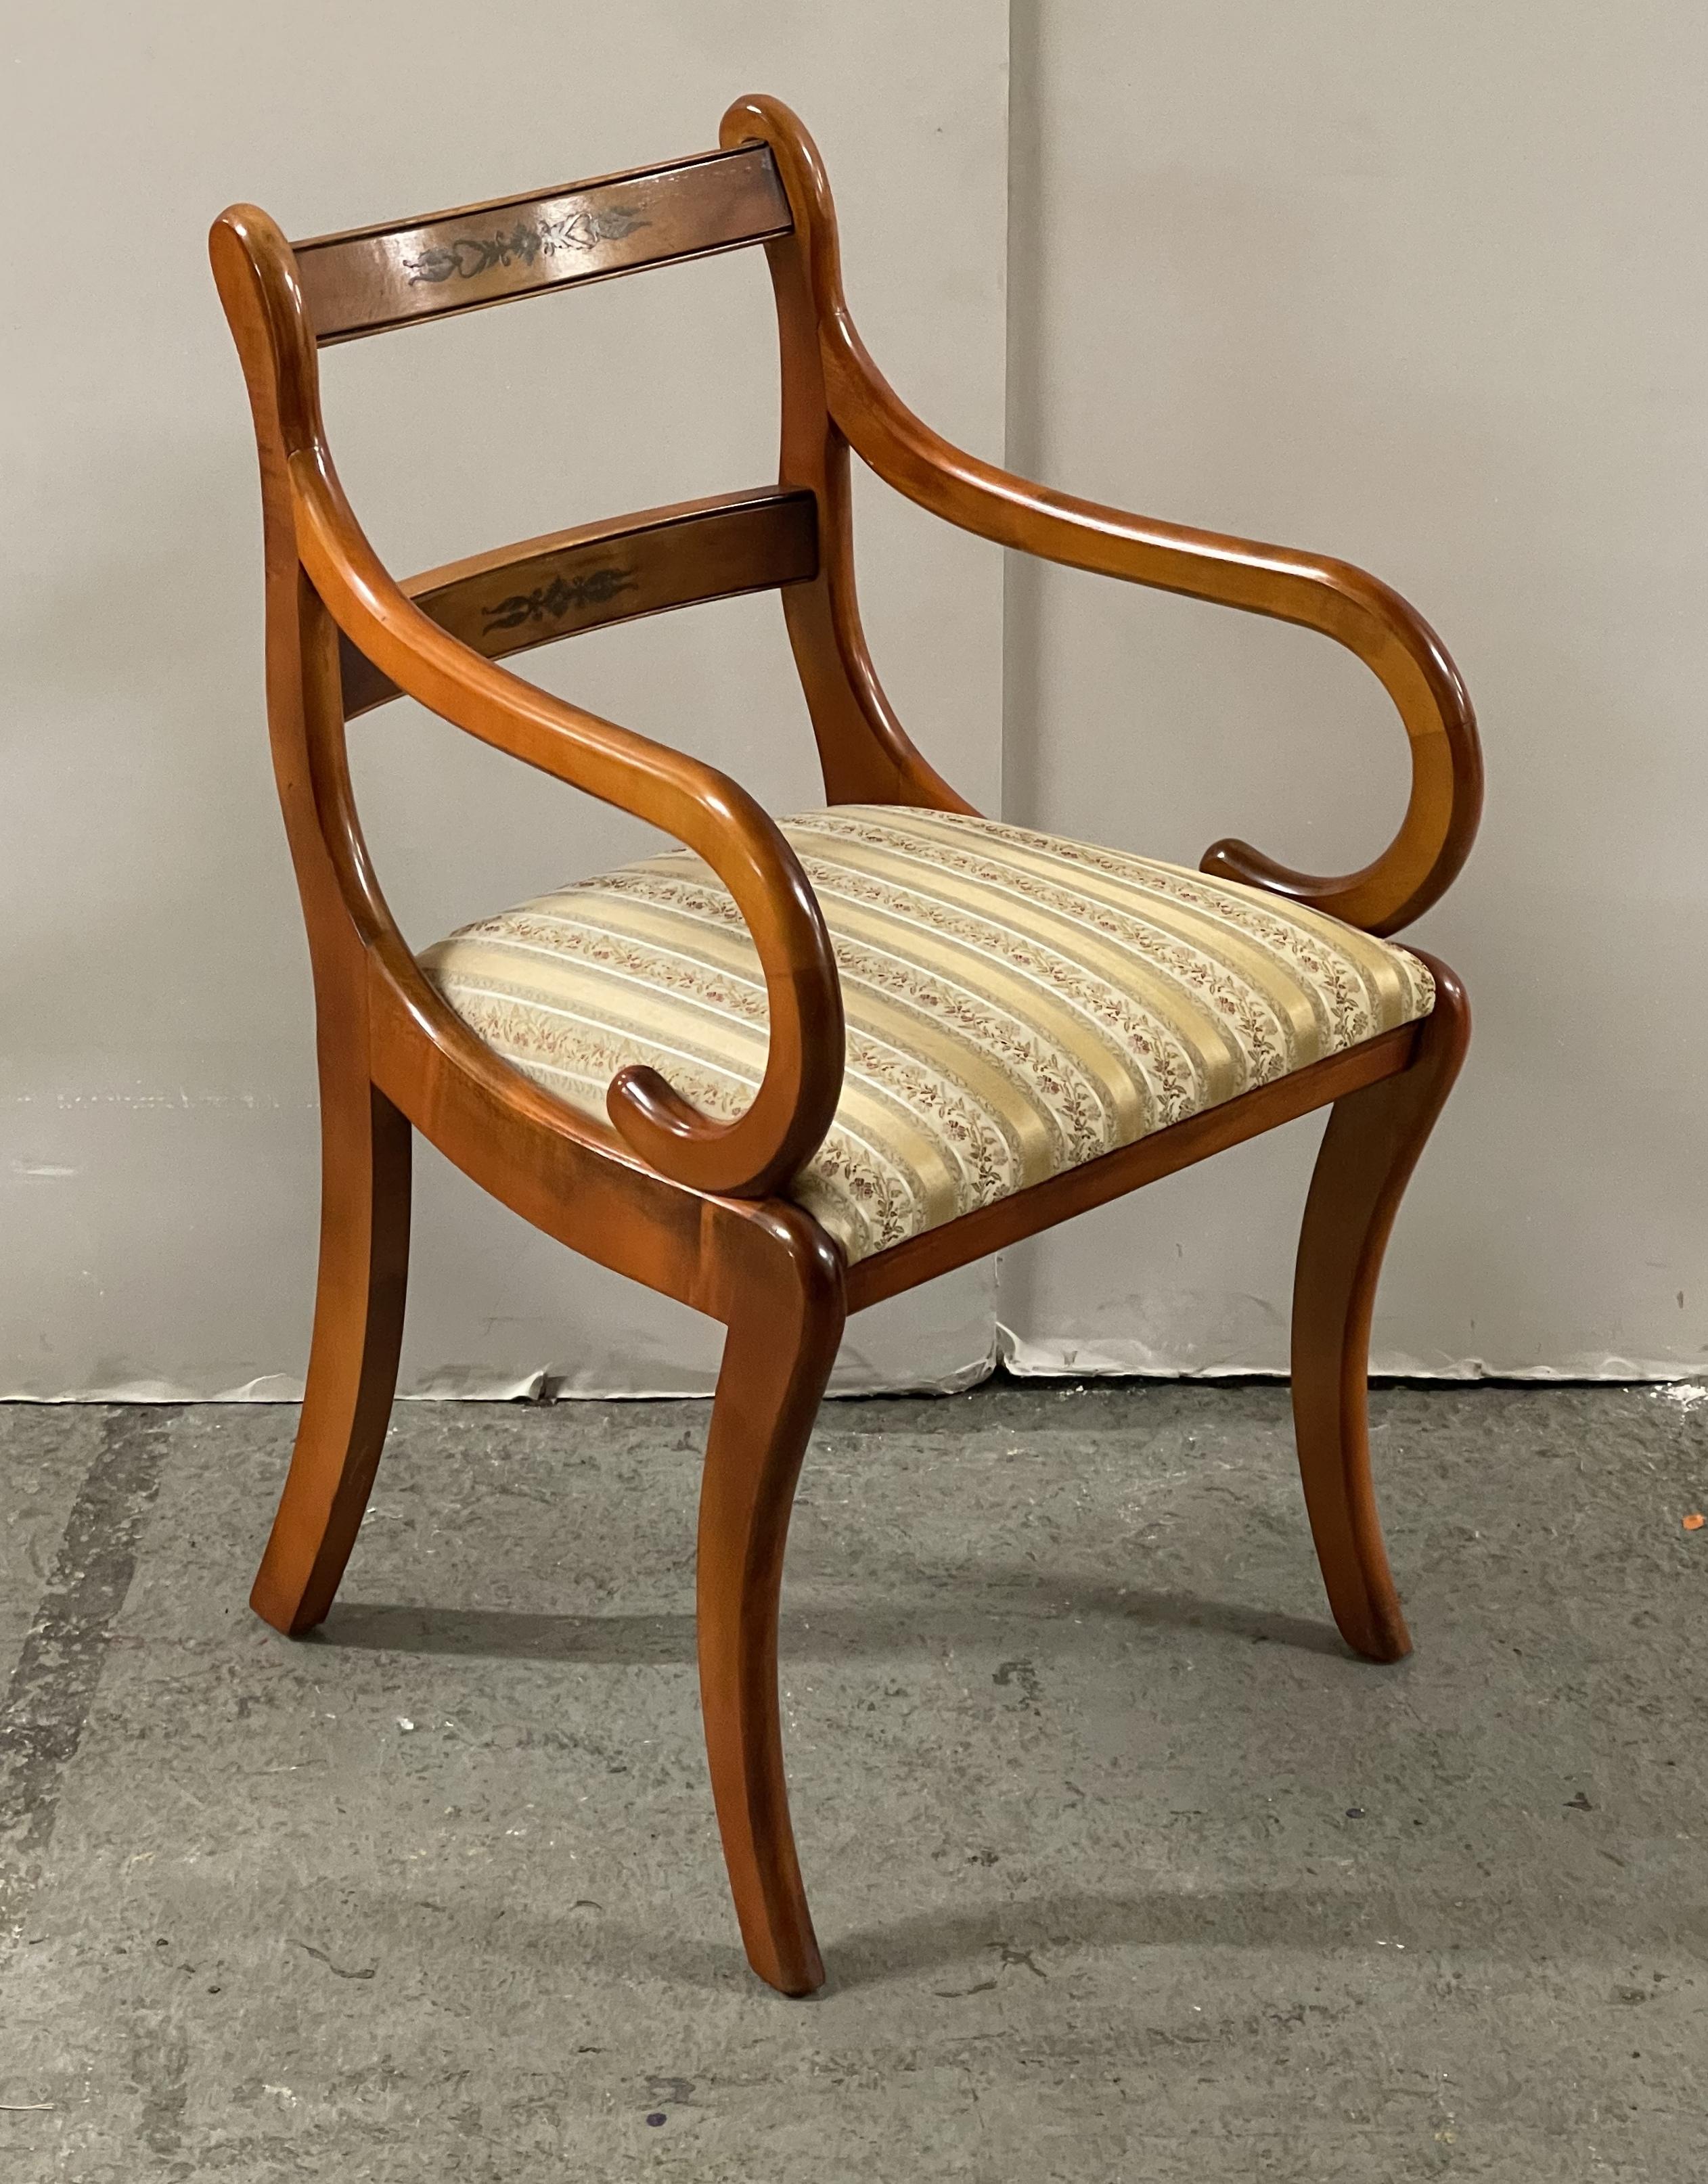 Here we have for sale a suite of six yew wood dining chairs including two carvers with inlaid detailing and upholstered seats.

Overall, the chairs are in good condition with a few minor signs of wear, they have been cleaned and polished ready for